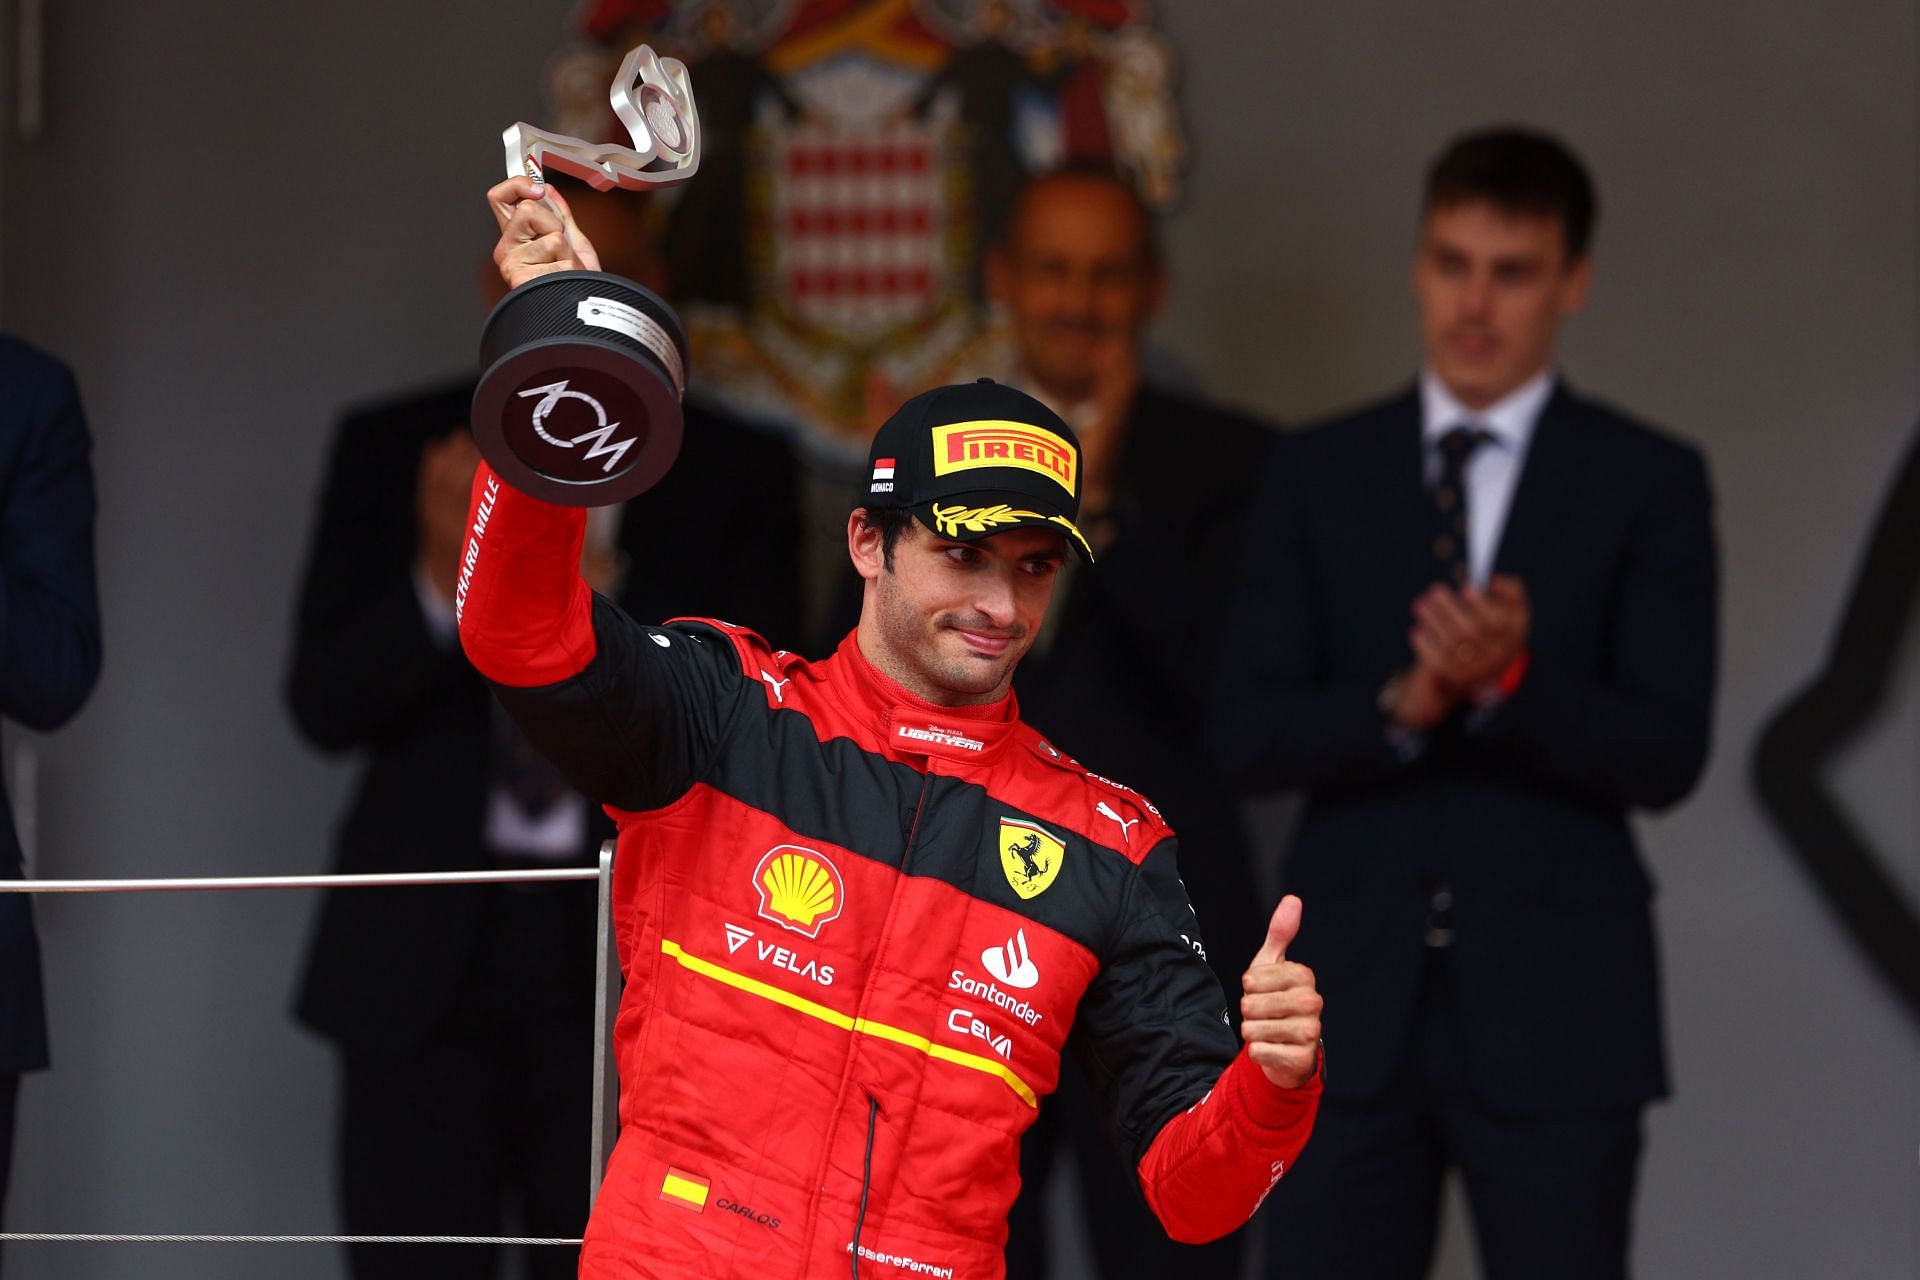 Second-placed Carlos Sainz celebrates on the podium during the F1 Grand Prix of Monaco (Photo by Clive Rose/Getty Images)